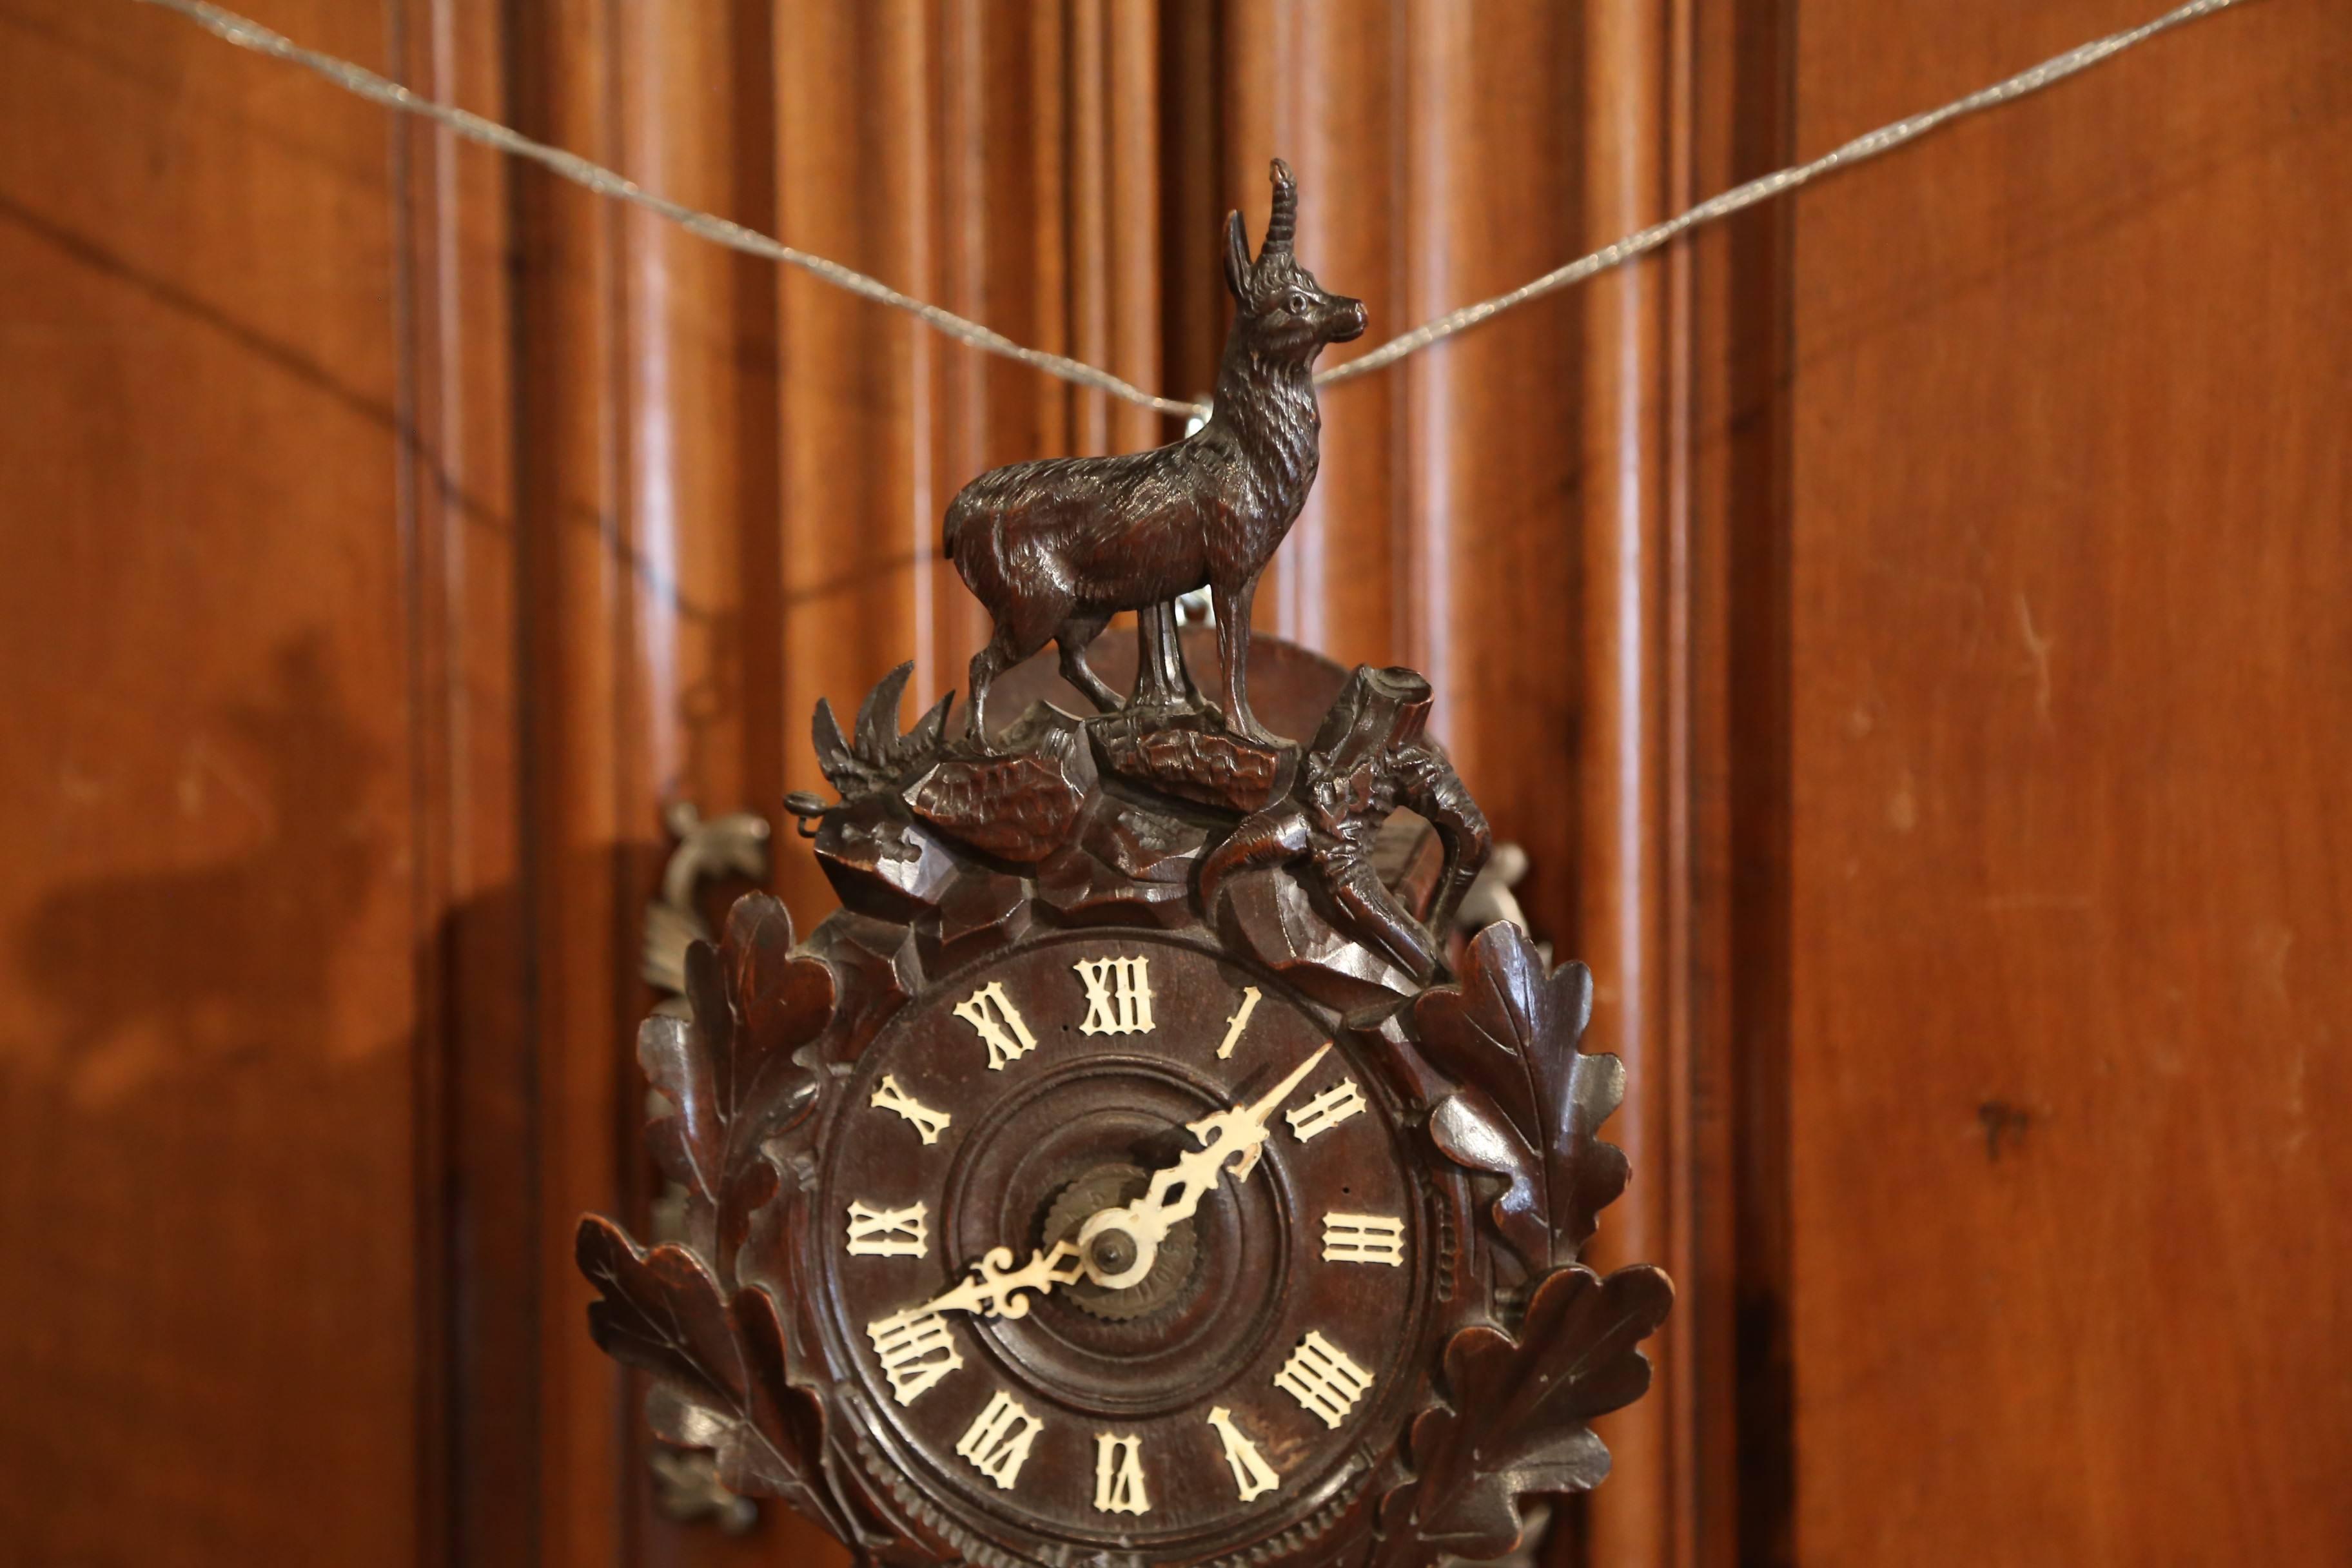 Elegant small wall hanging clock from the Alps mountains of France; crafted circa 1860, the fruit wood time keeper features a hand carved deer standing on rock at the pediment and foliage around the center clock. The black forest clock is in